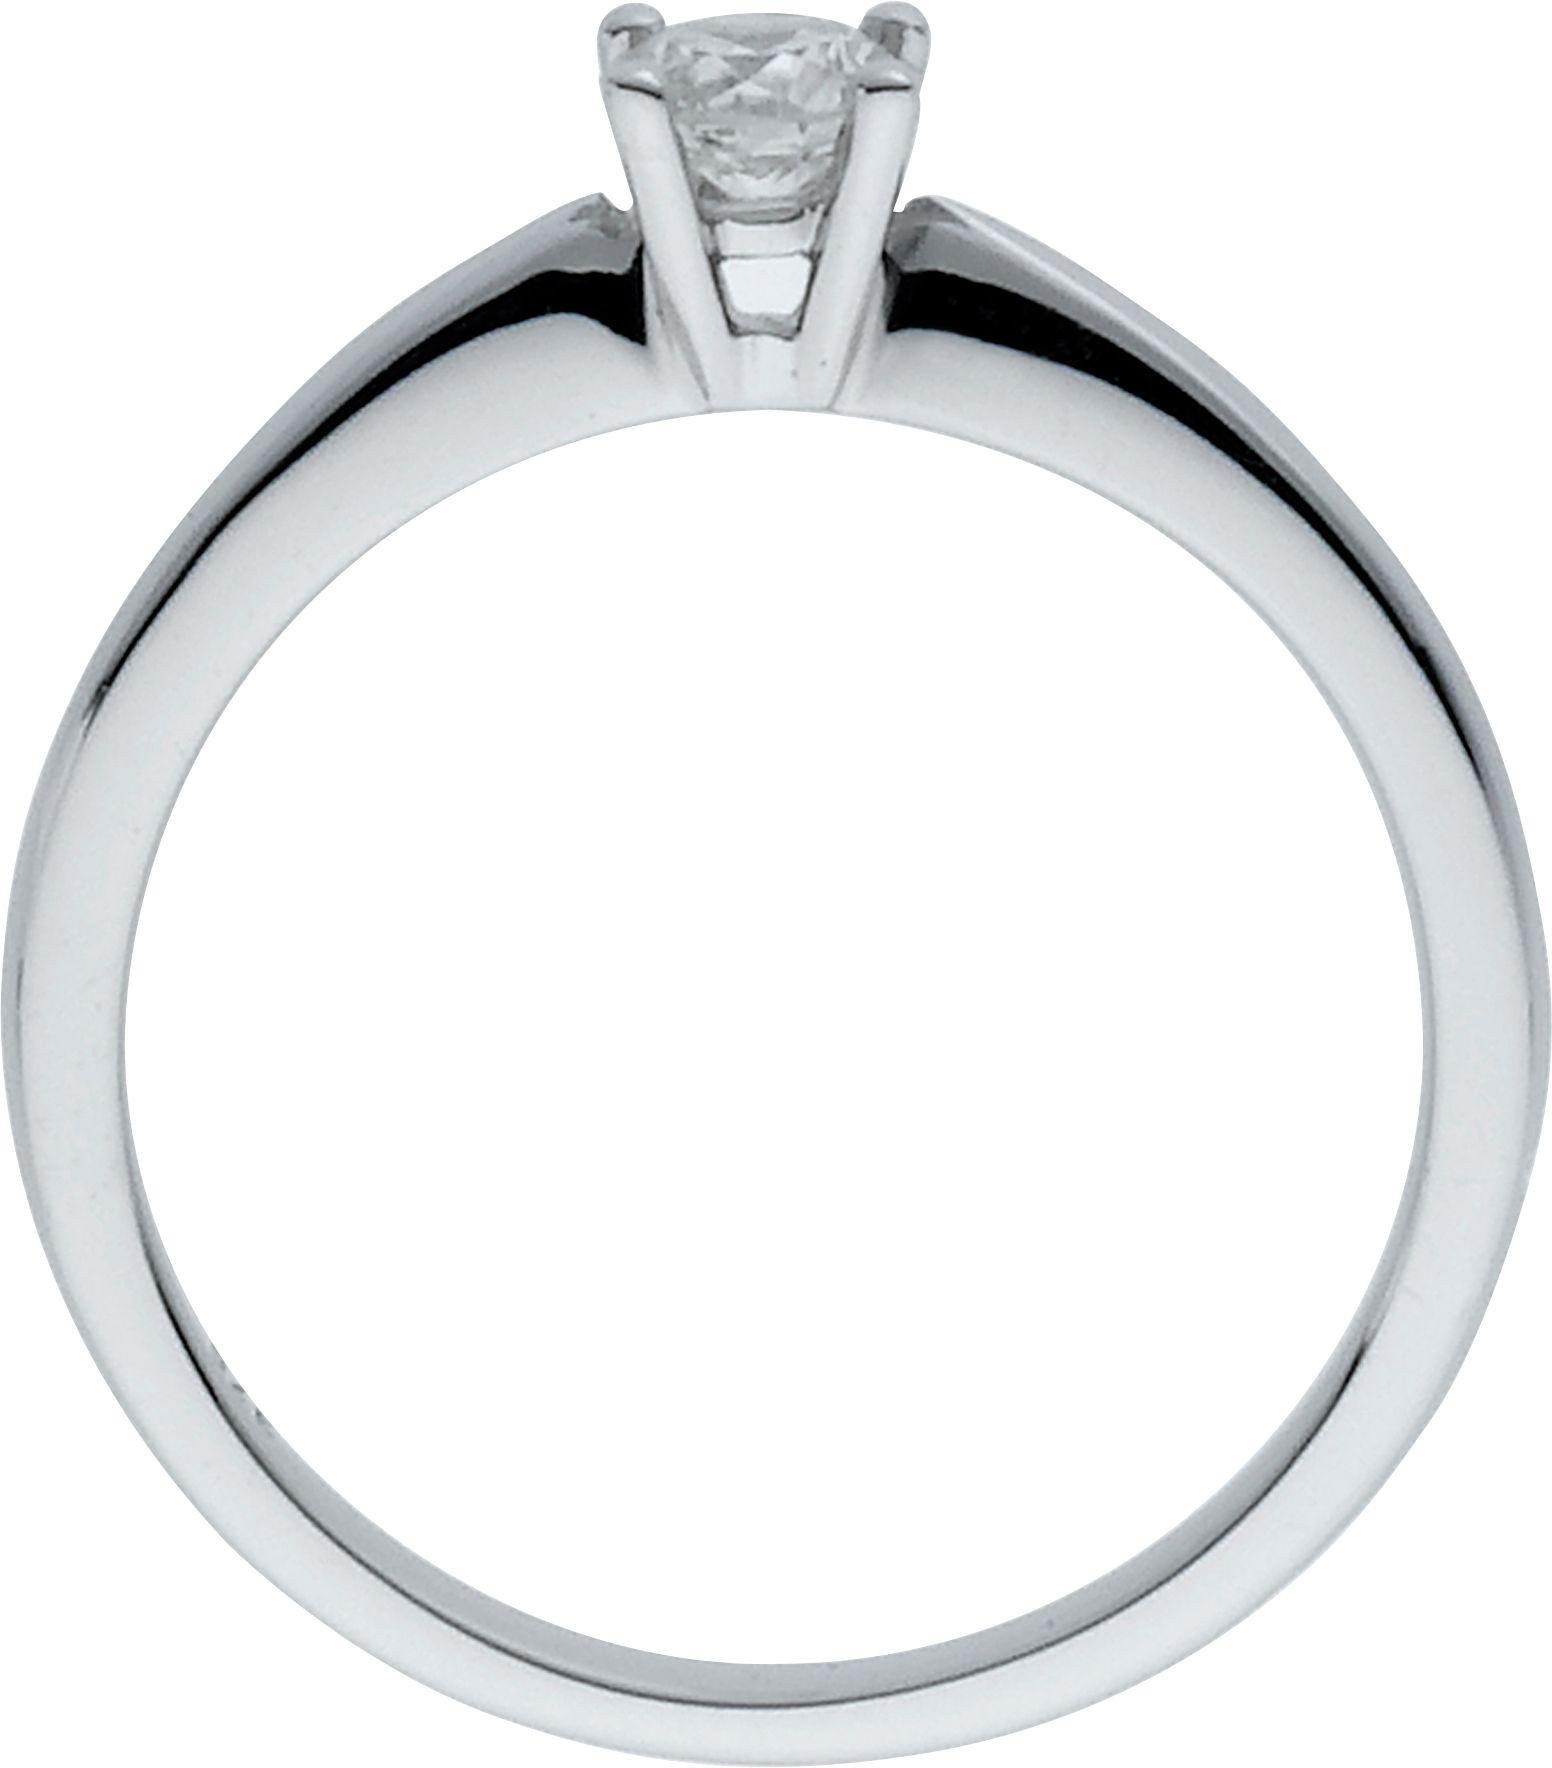 Everlasting Love 18ct White Gold 0.25ct Solitaire Ring - N